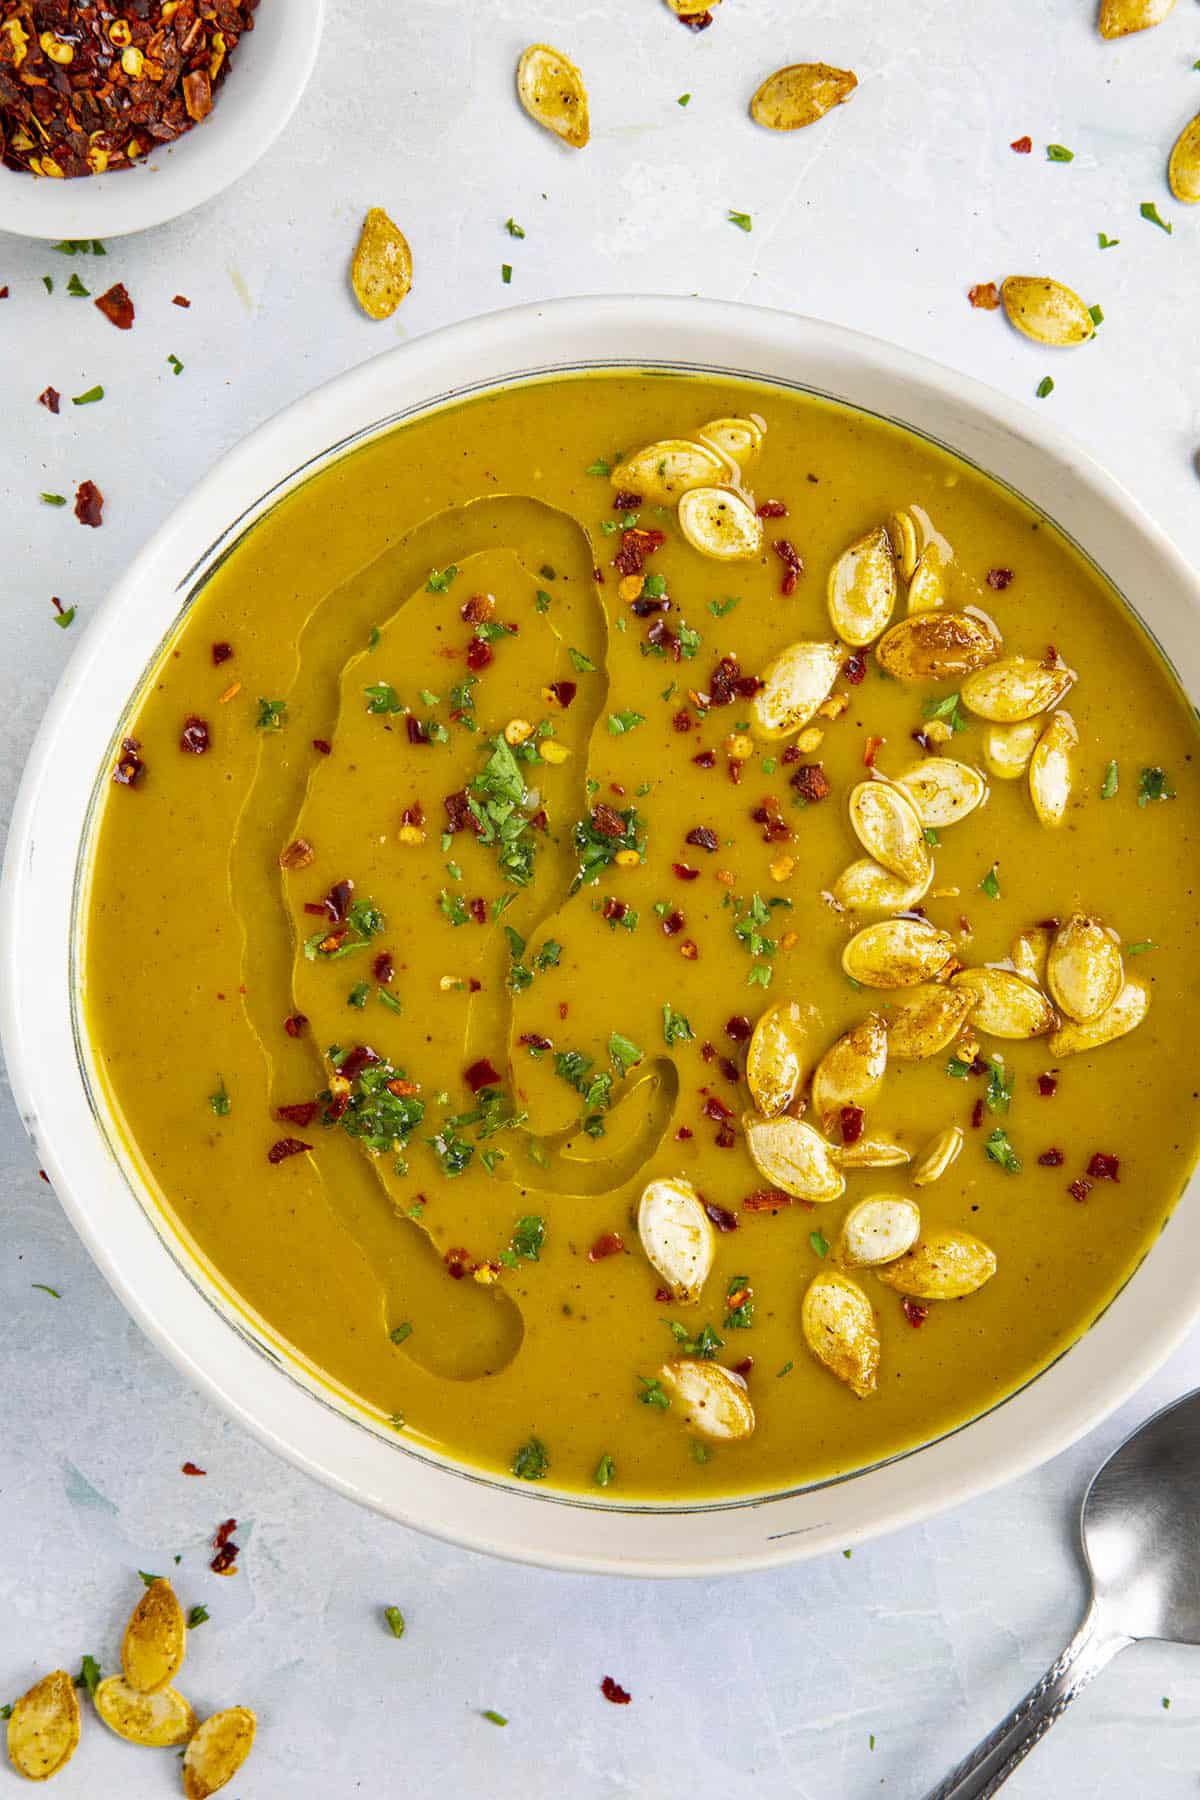 Spicy Pumpkin Soup in a bowl with pumpkin seeds and olive oil swirled over the top